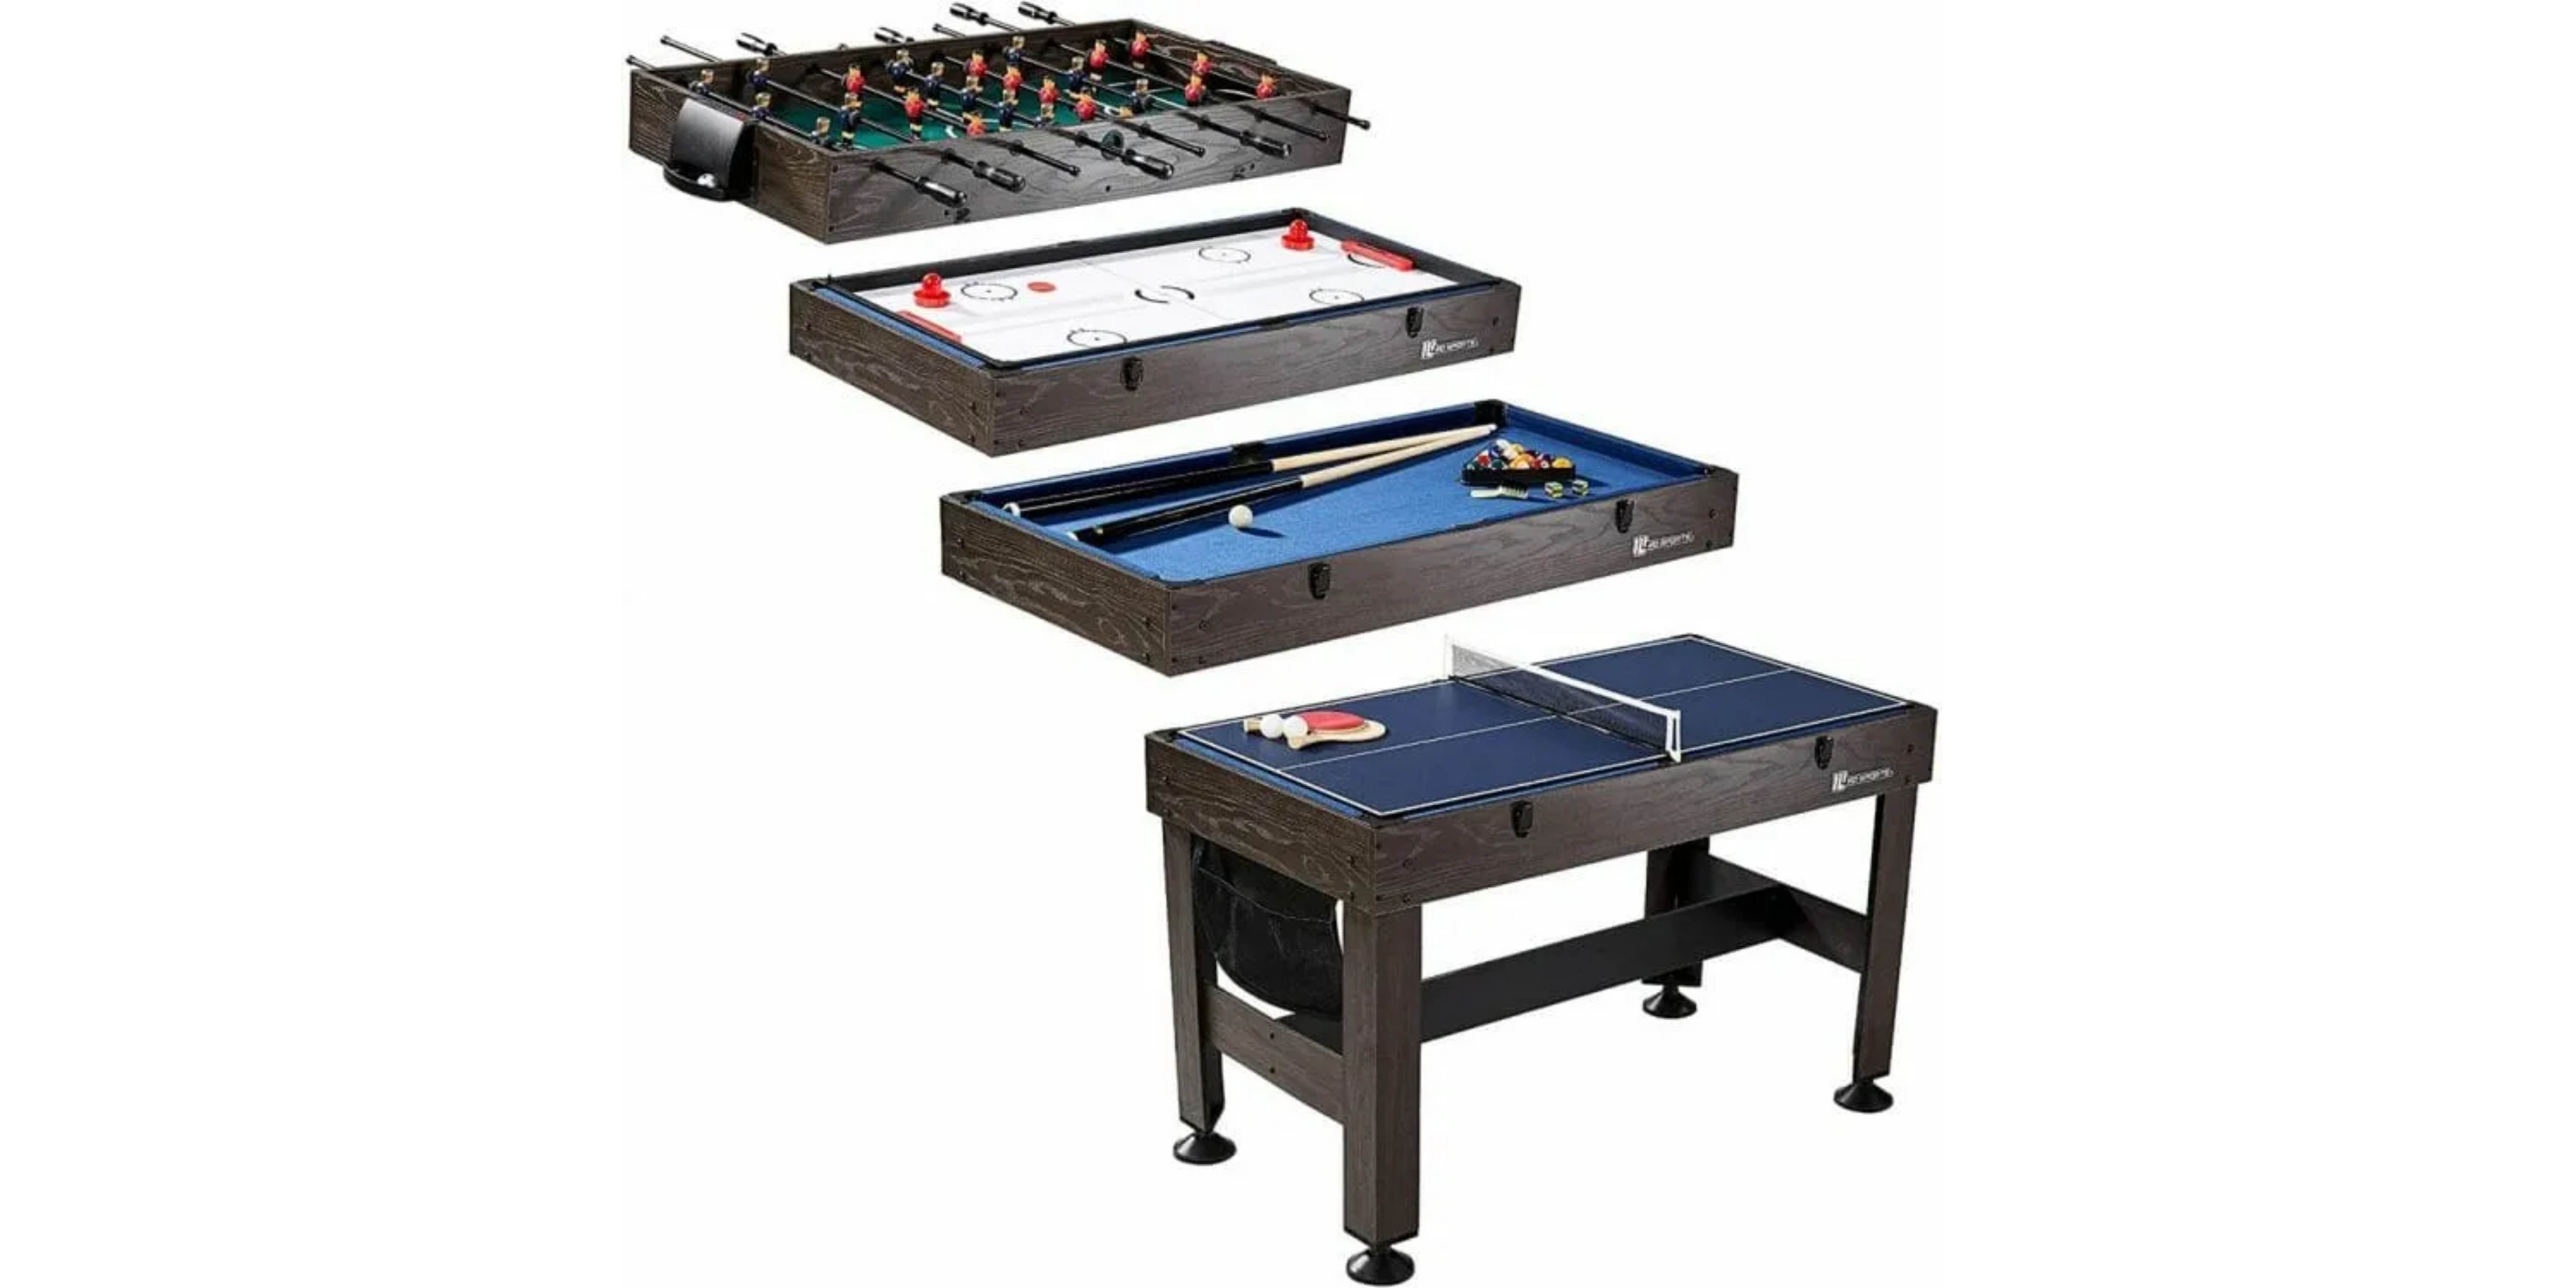 Foosball, Pool, Air Hockey, and Table Tennis in one game table